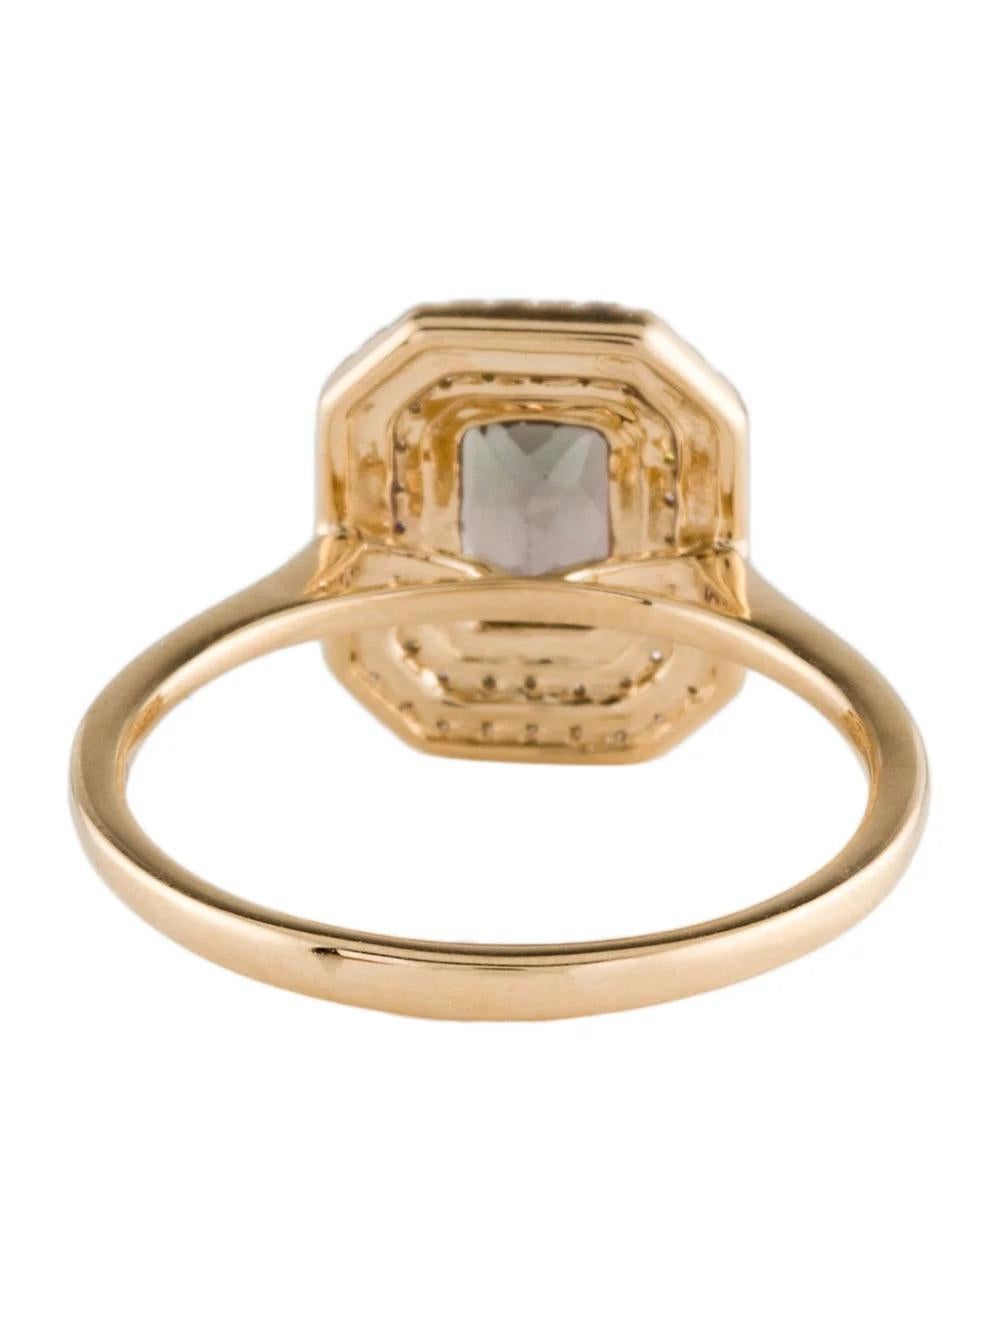 14K 1.07ctw Tourmaline Diamond Cocktail Ring - Vintage Style Jewelry - Size 6.25 In New Condition For Sale In Holtsville, NY